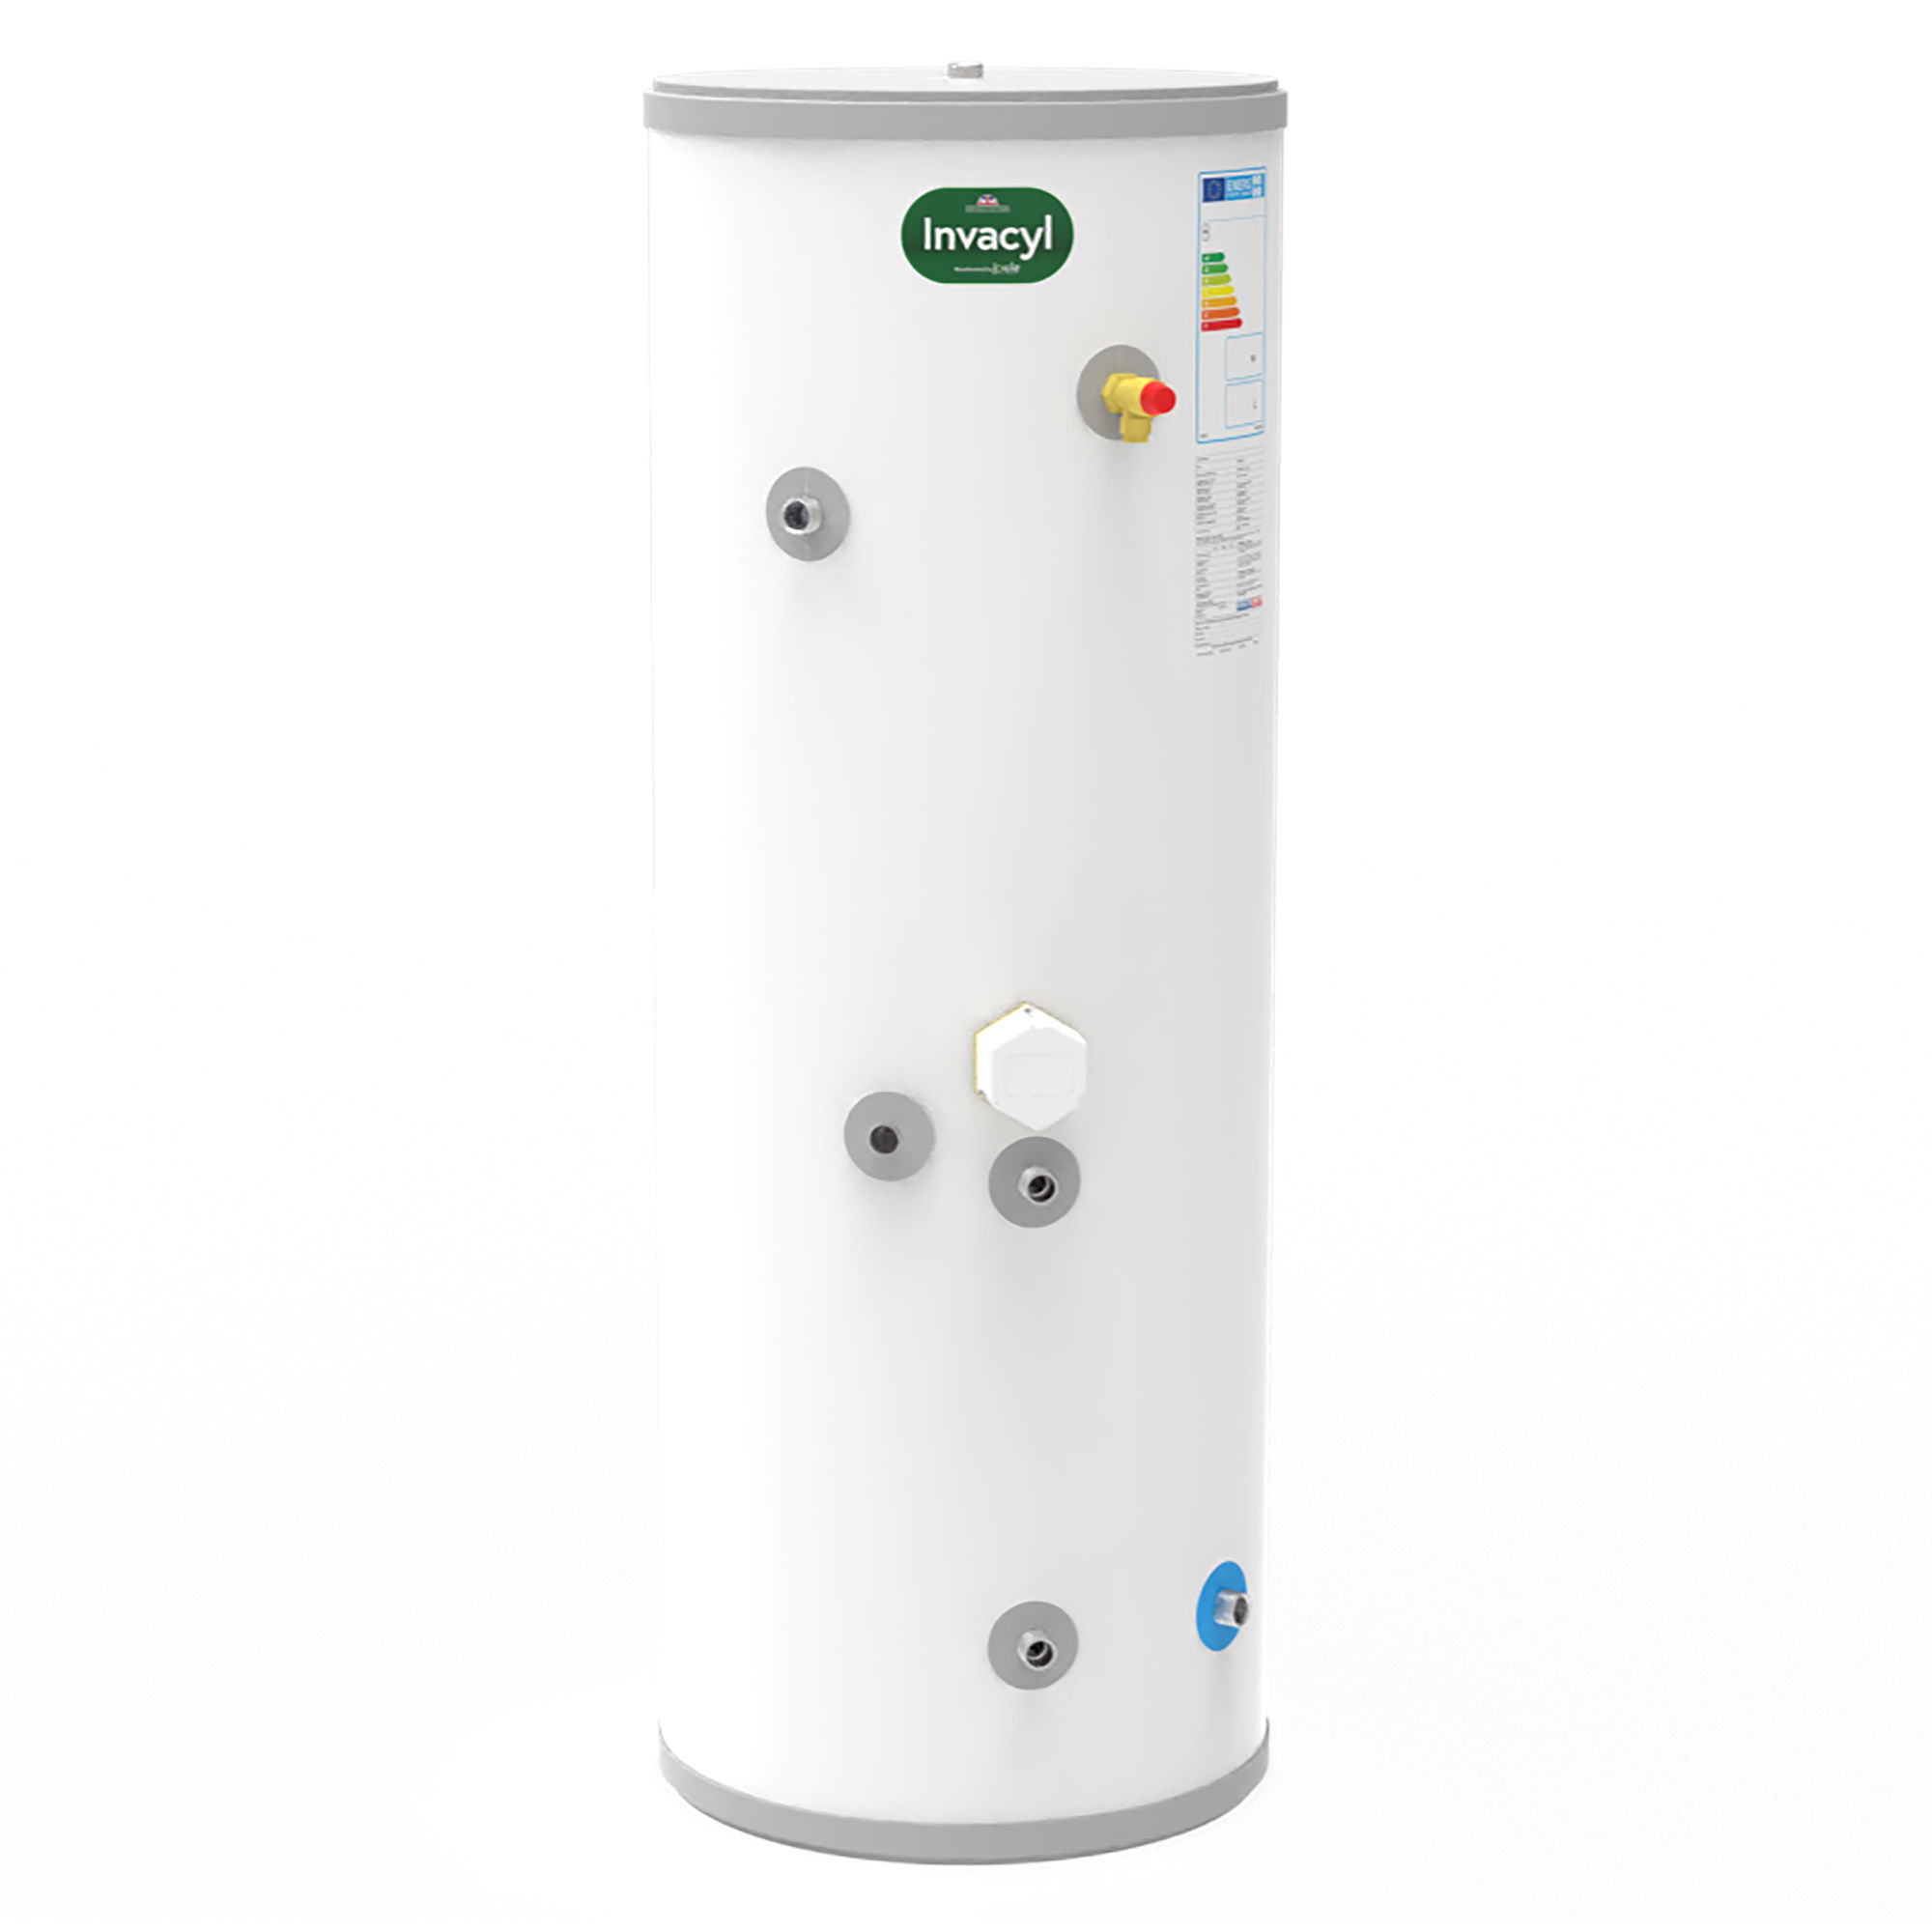 Joule Invacyl Unvented Indirect Standard Hot Water Cylinder 210L - TRBMVI-0210LFC